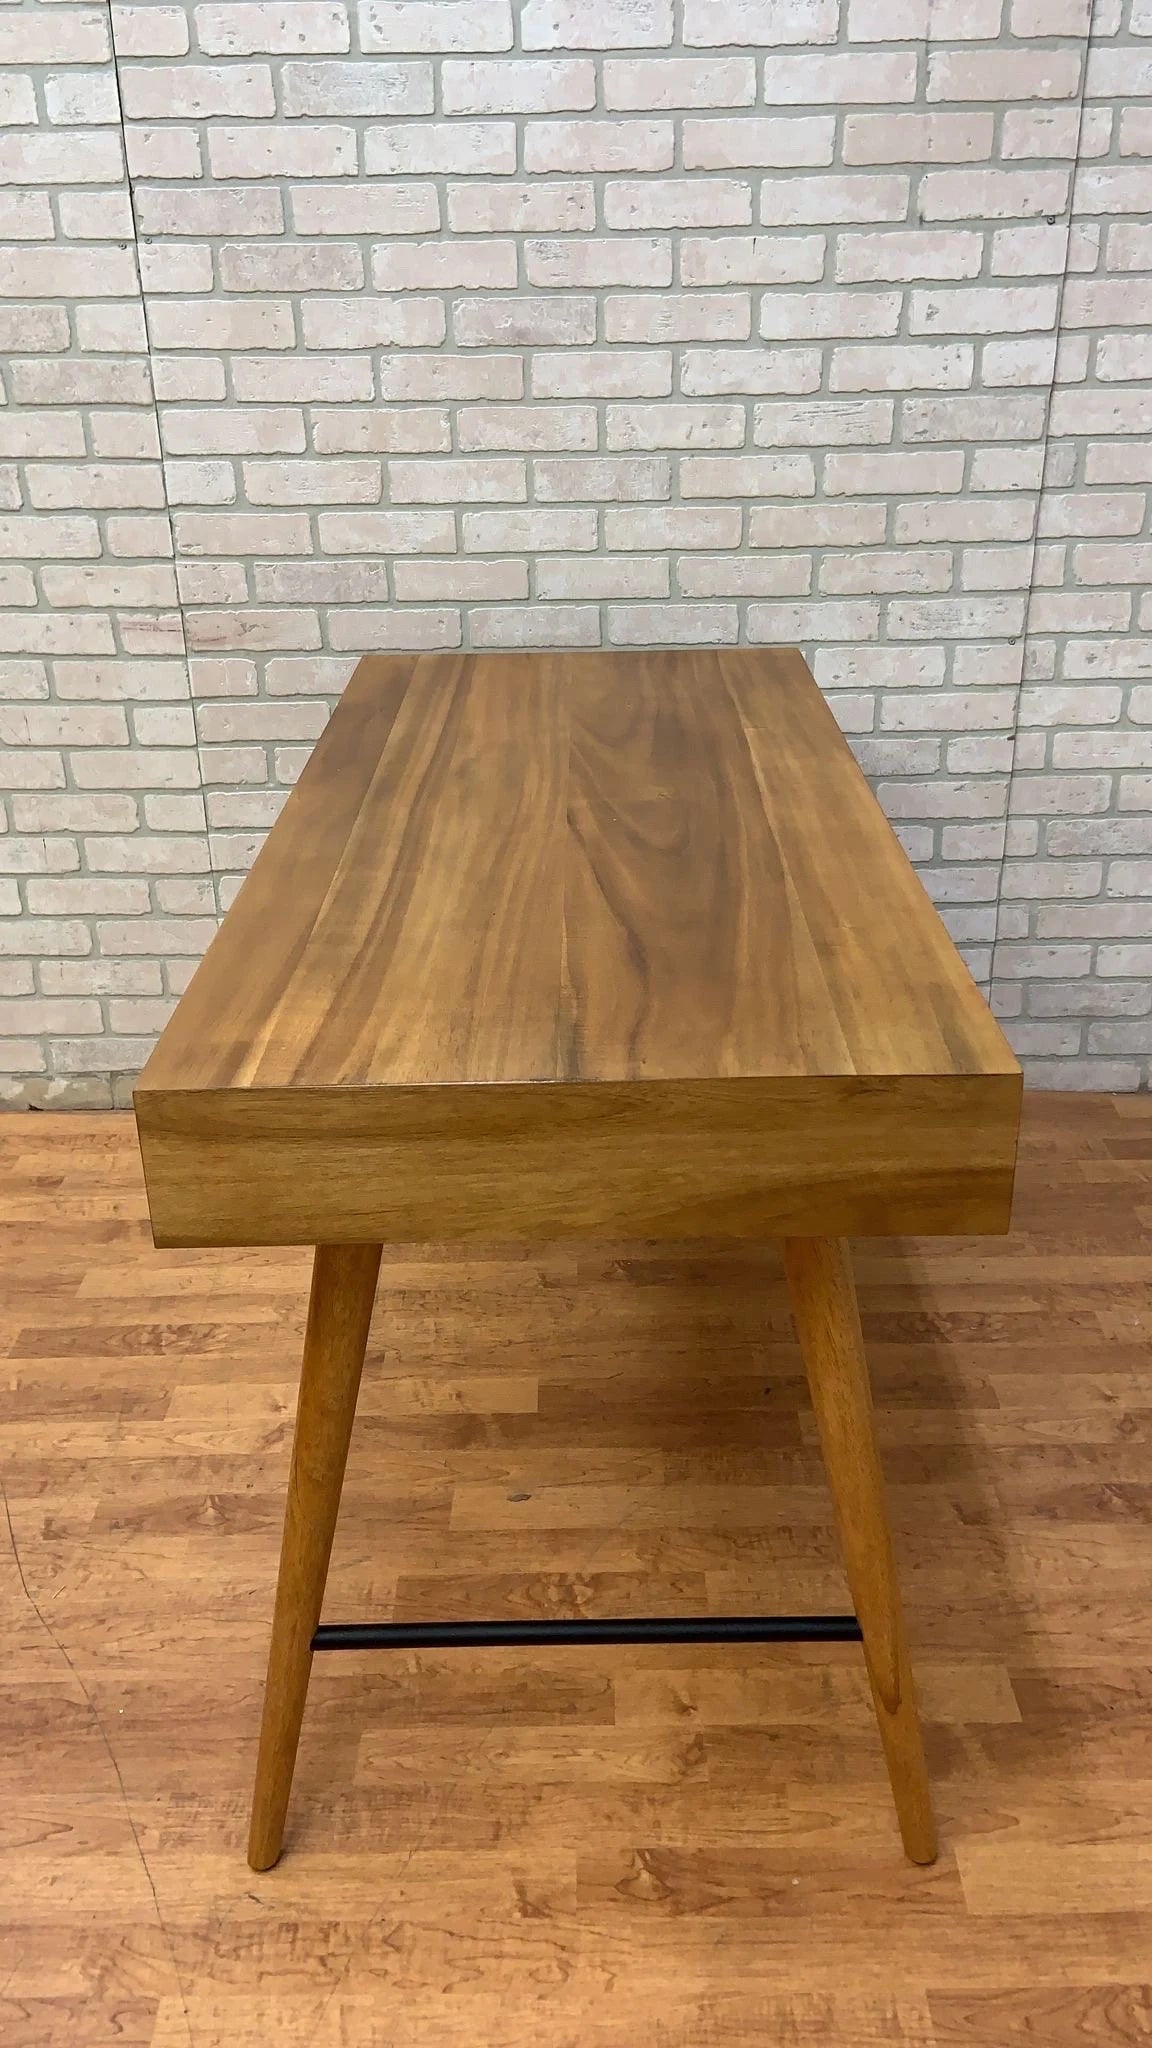 Roller One Co. Writing Desk Table